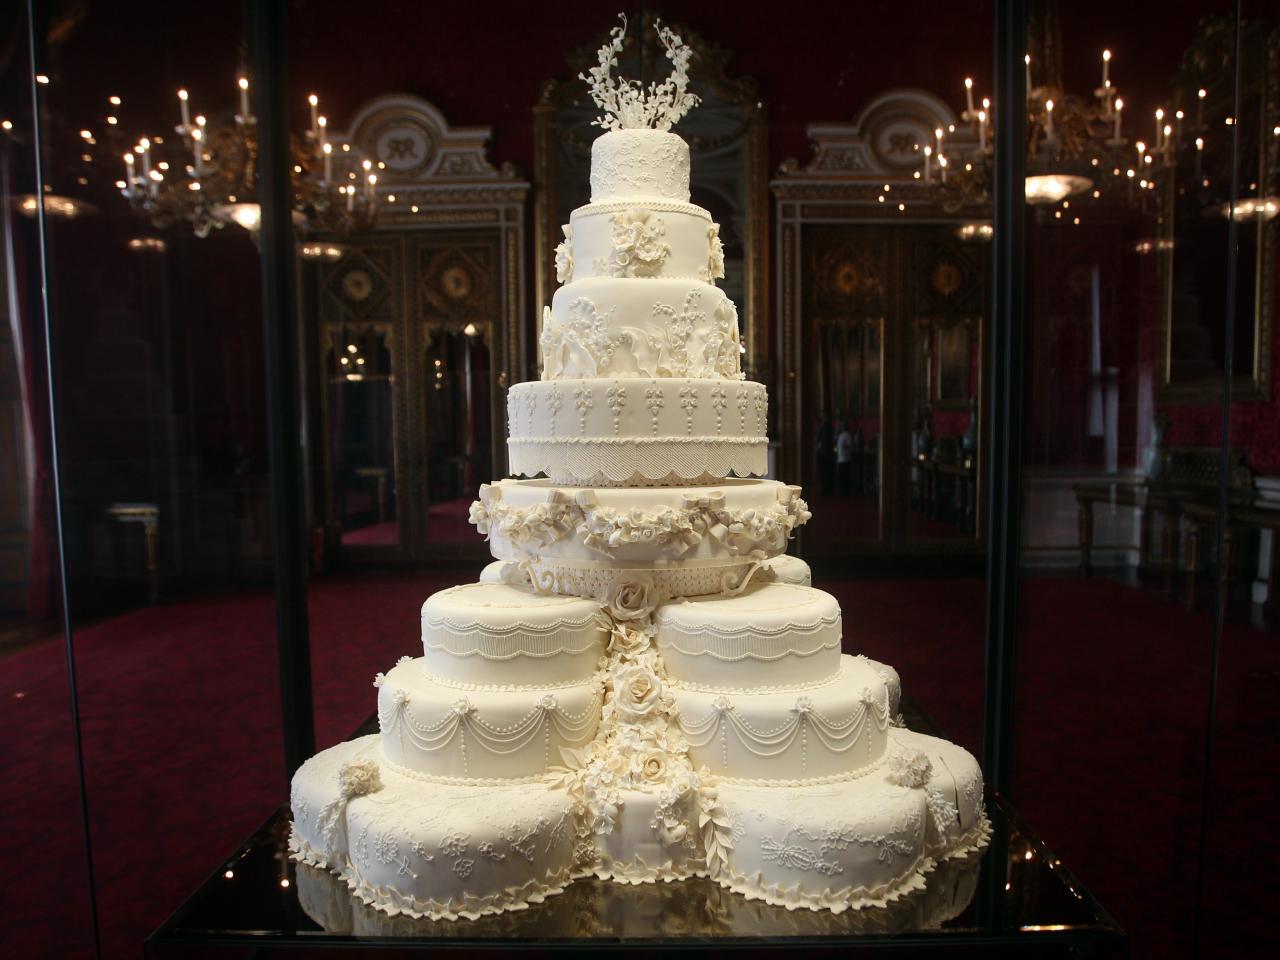 The Tradition Of Saving The Top Tier Of The Wedding Cake - Bridals.PK